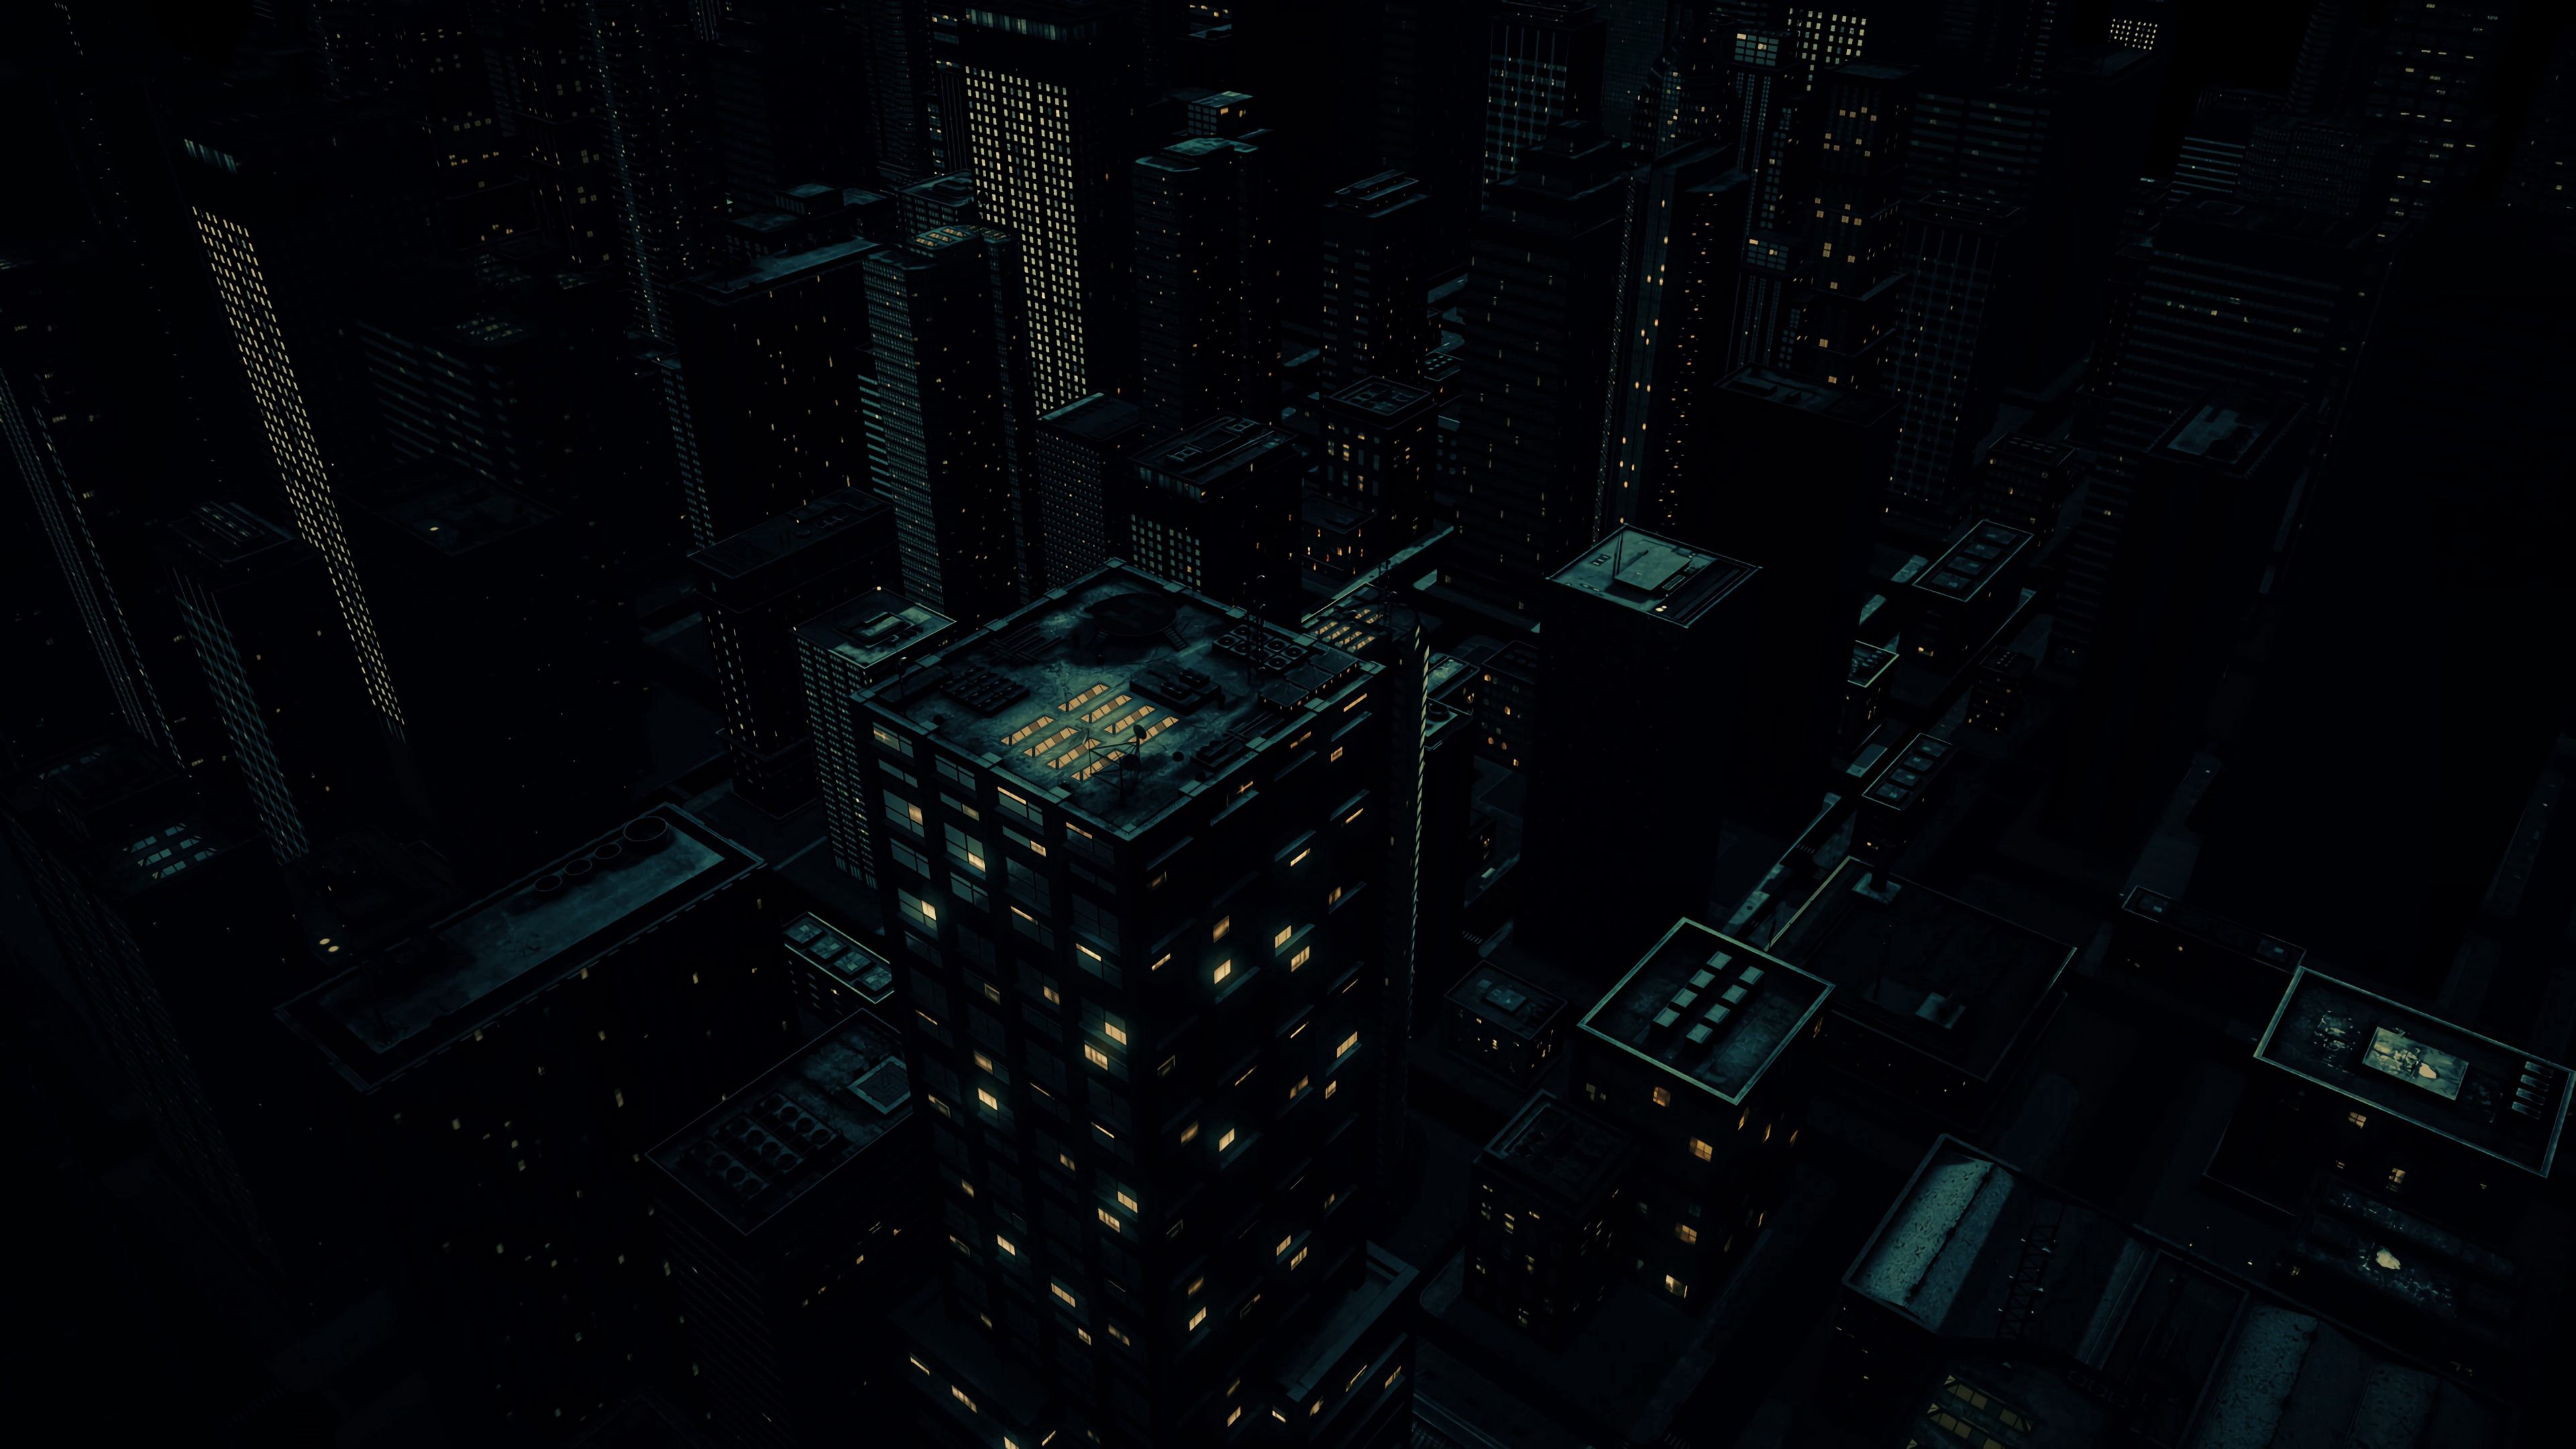 HD desktop wallpaper: Building, View From Above, Night City, Dark, Art  download free picture #105983